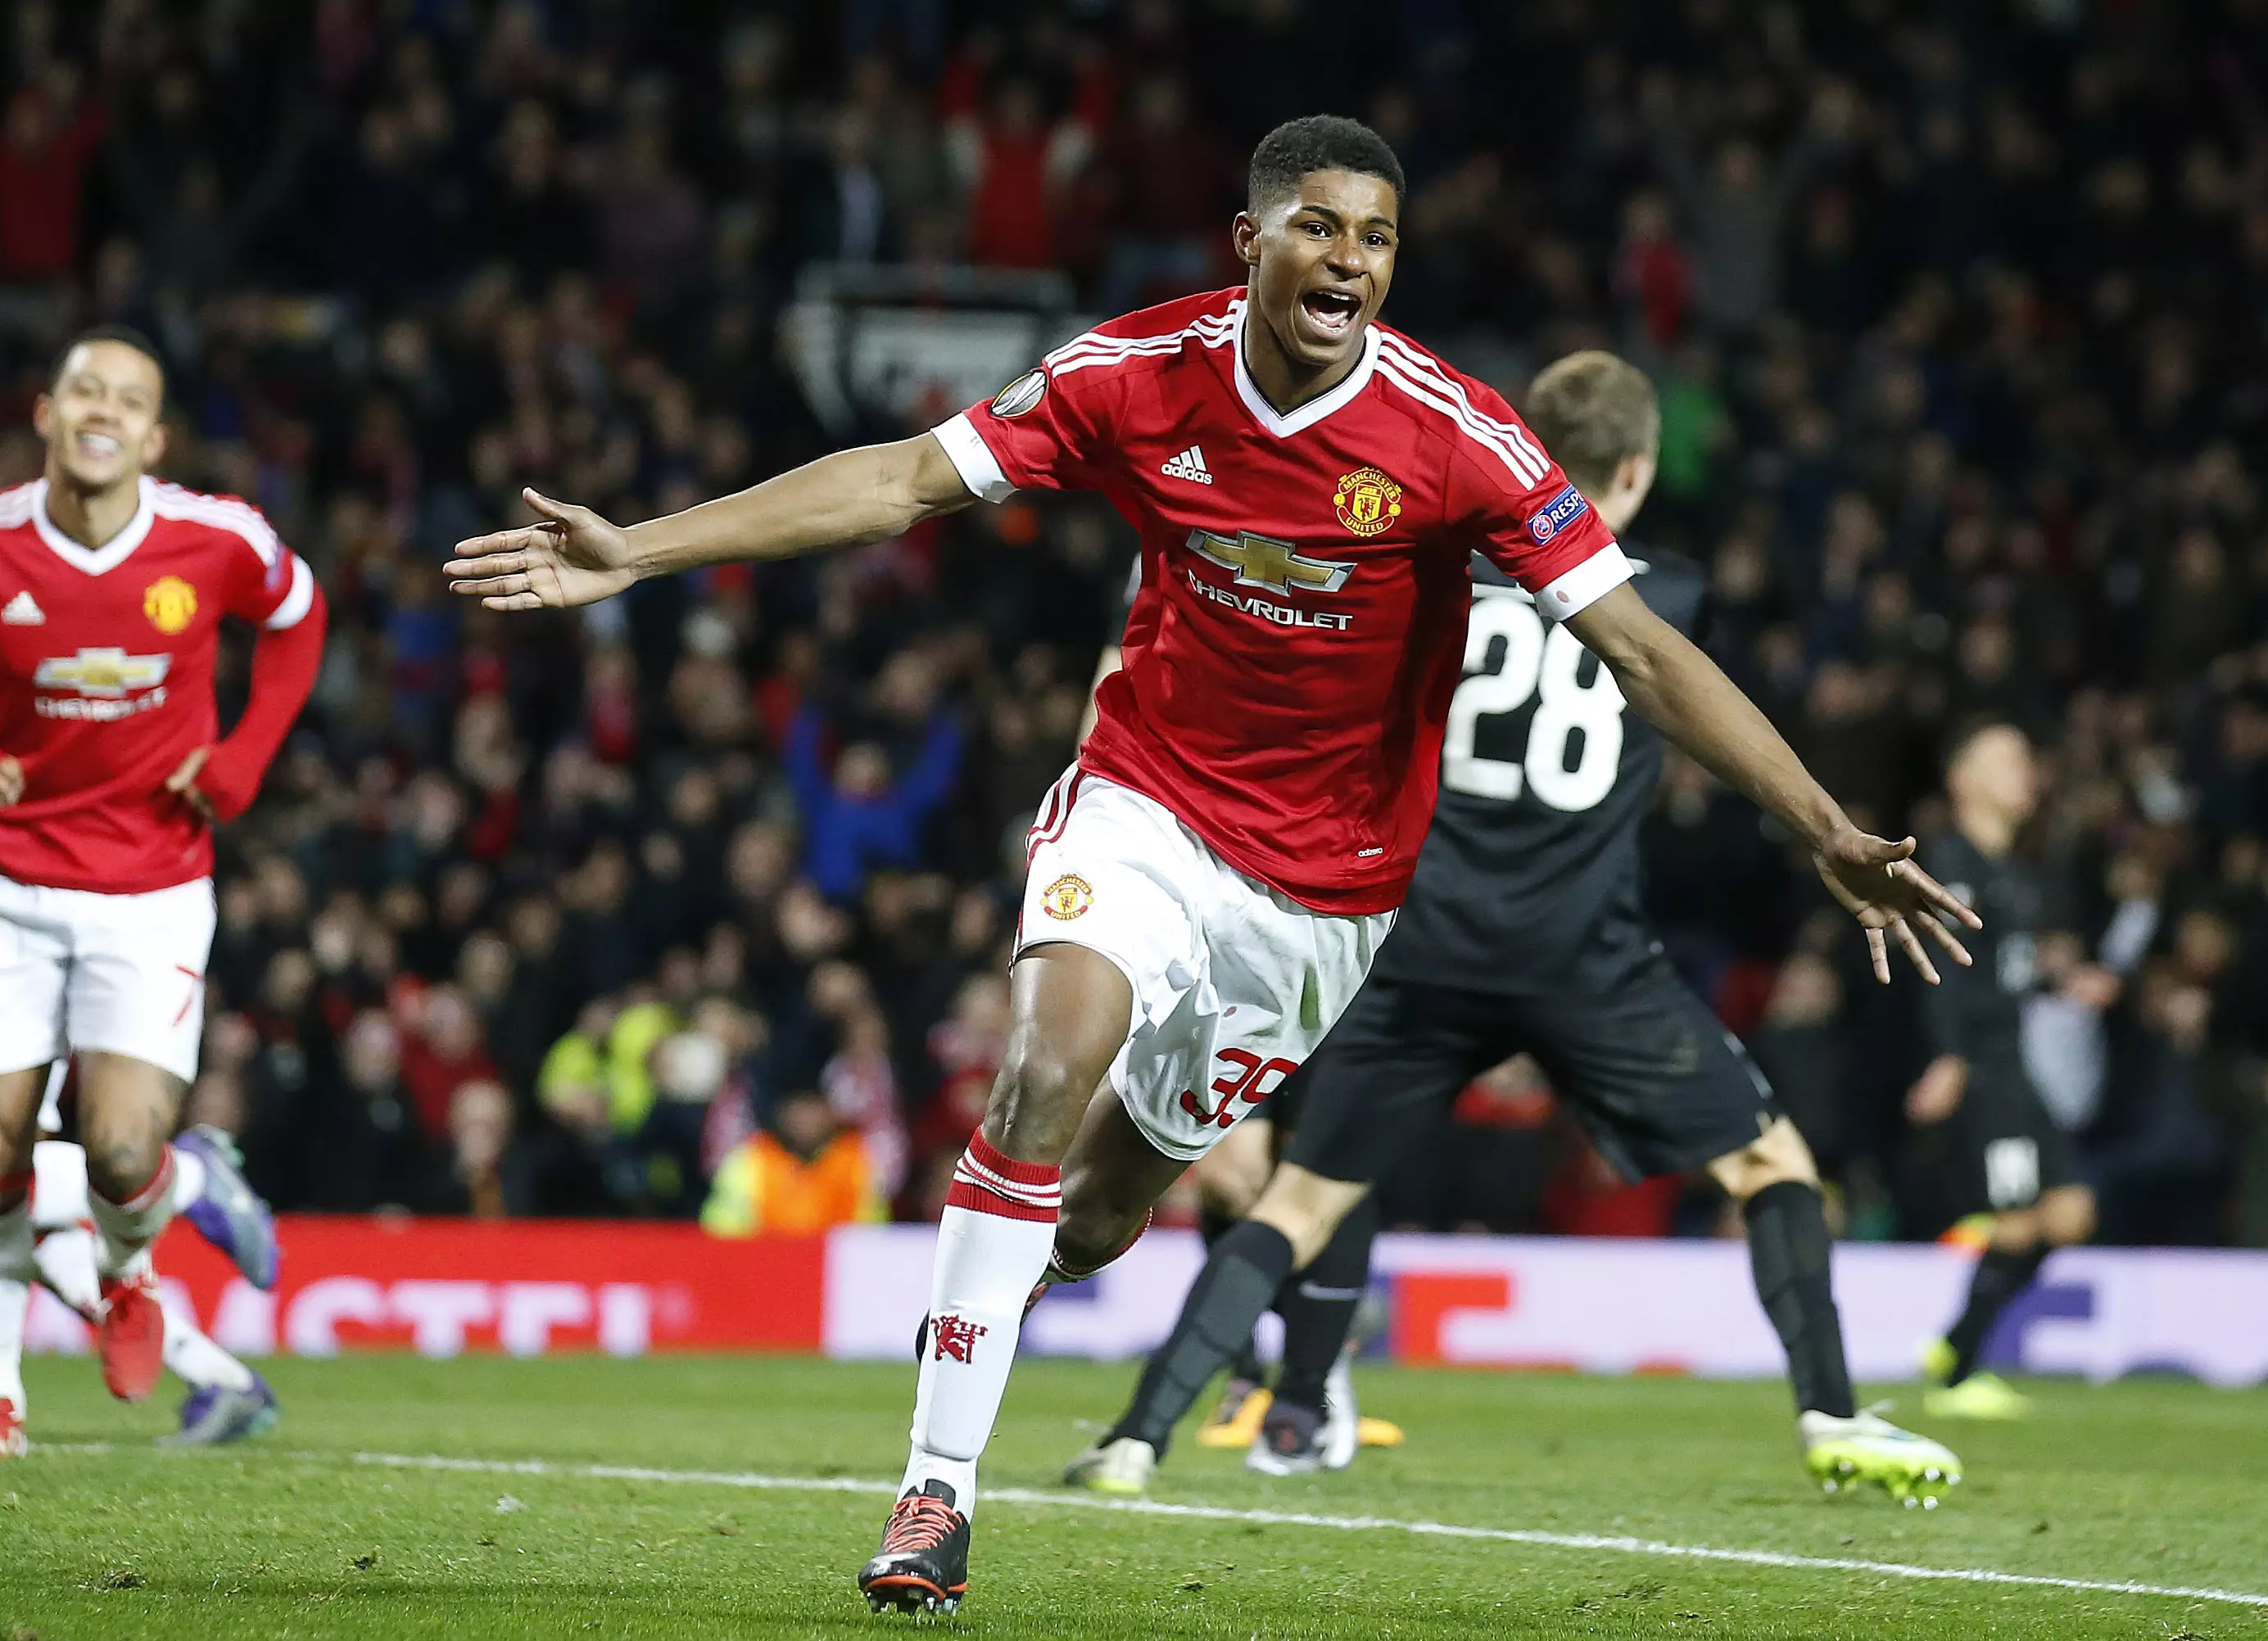 Marcus Rashford Has Moved His Mum And Brothers Into £800k Luxury House